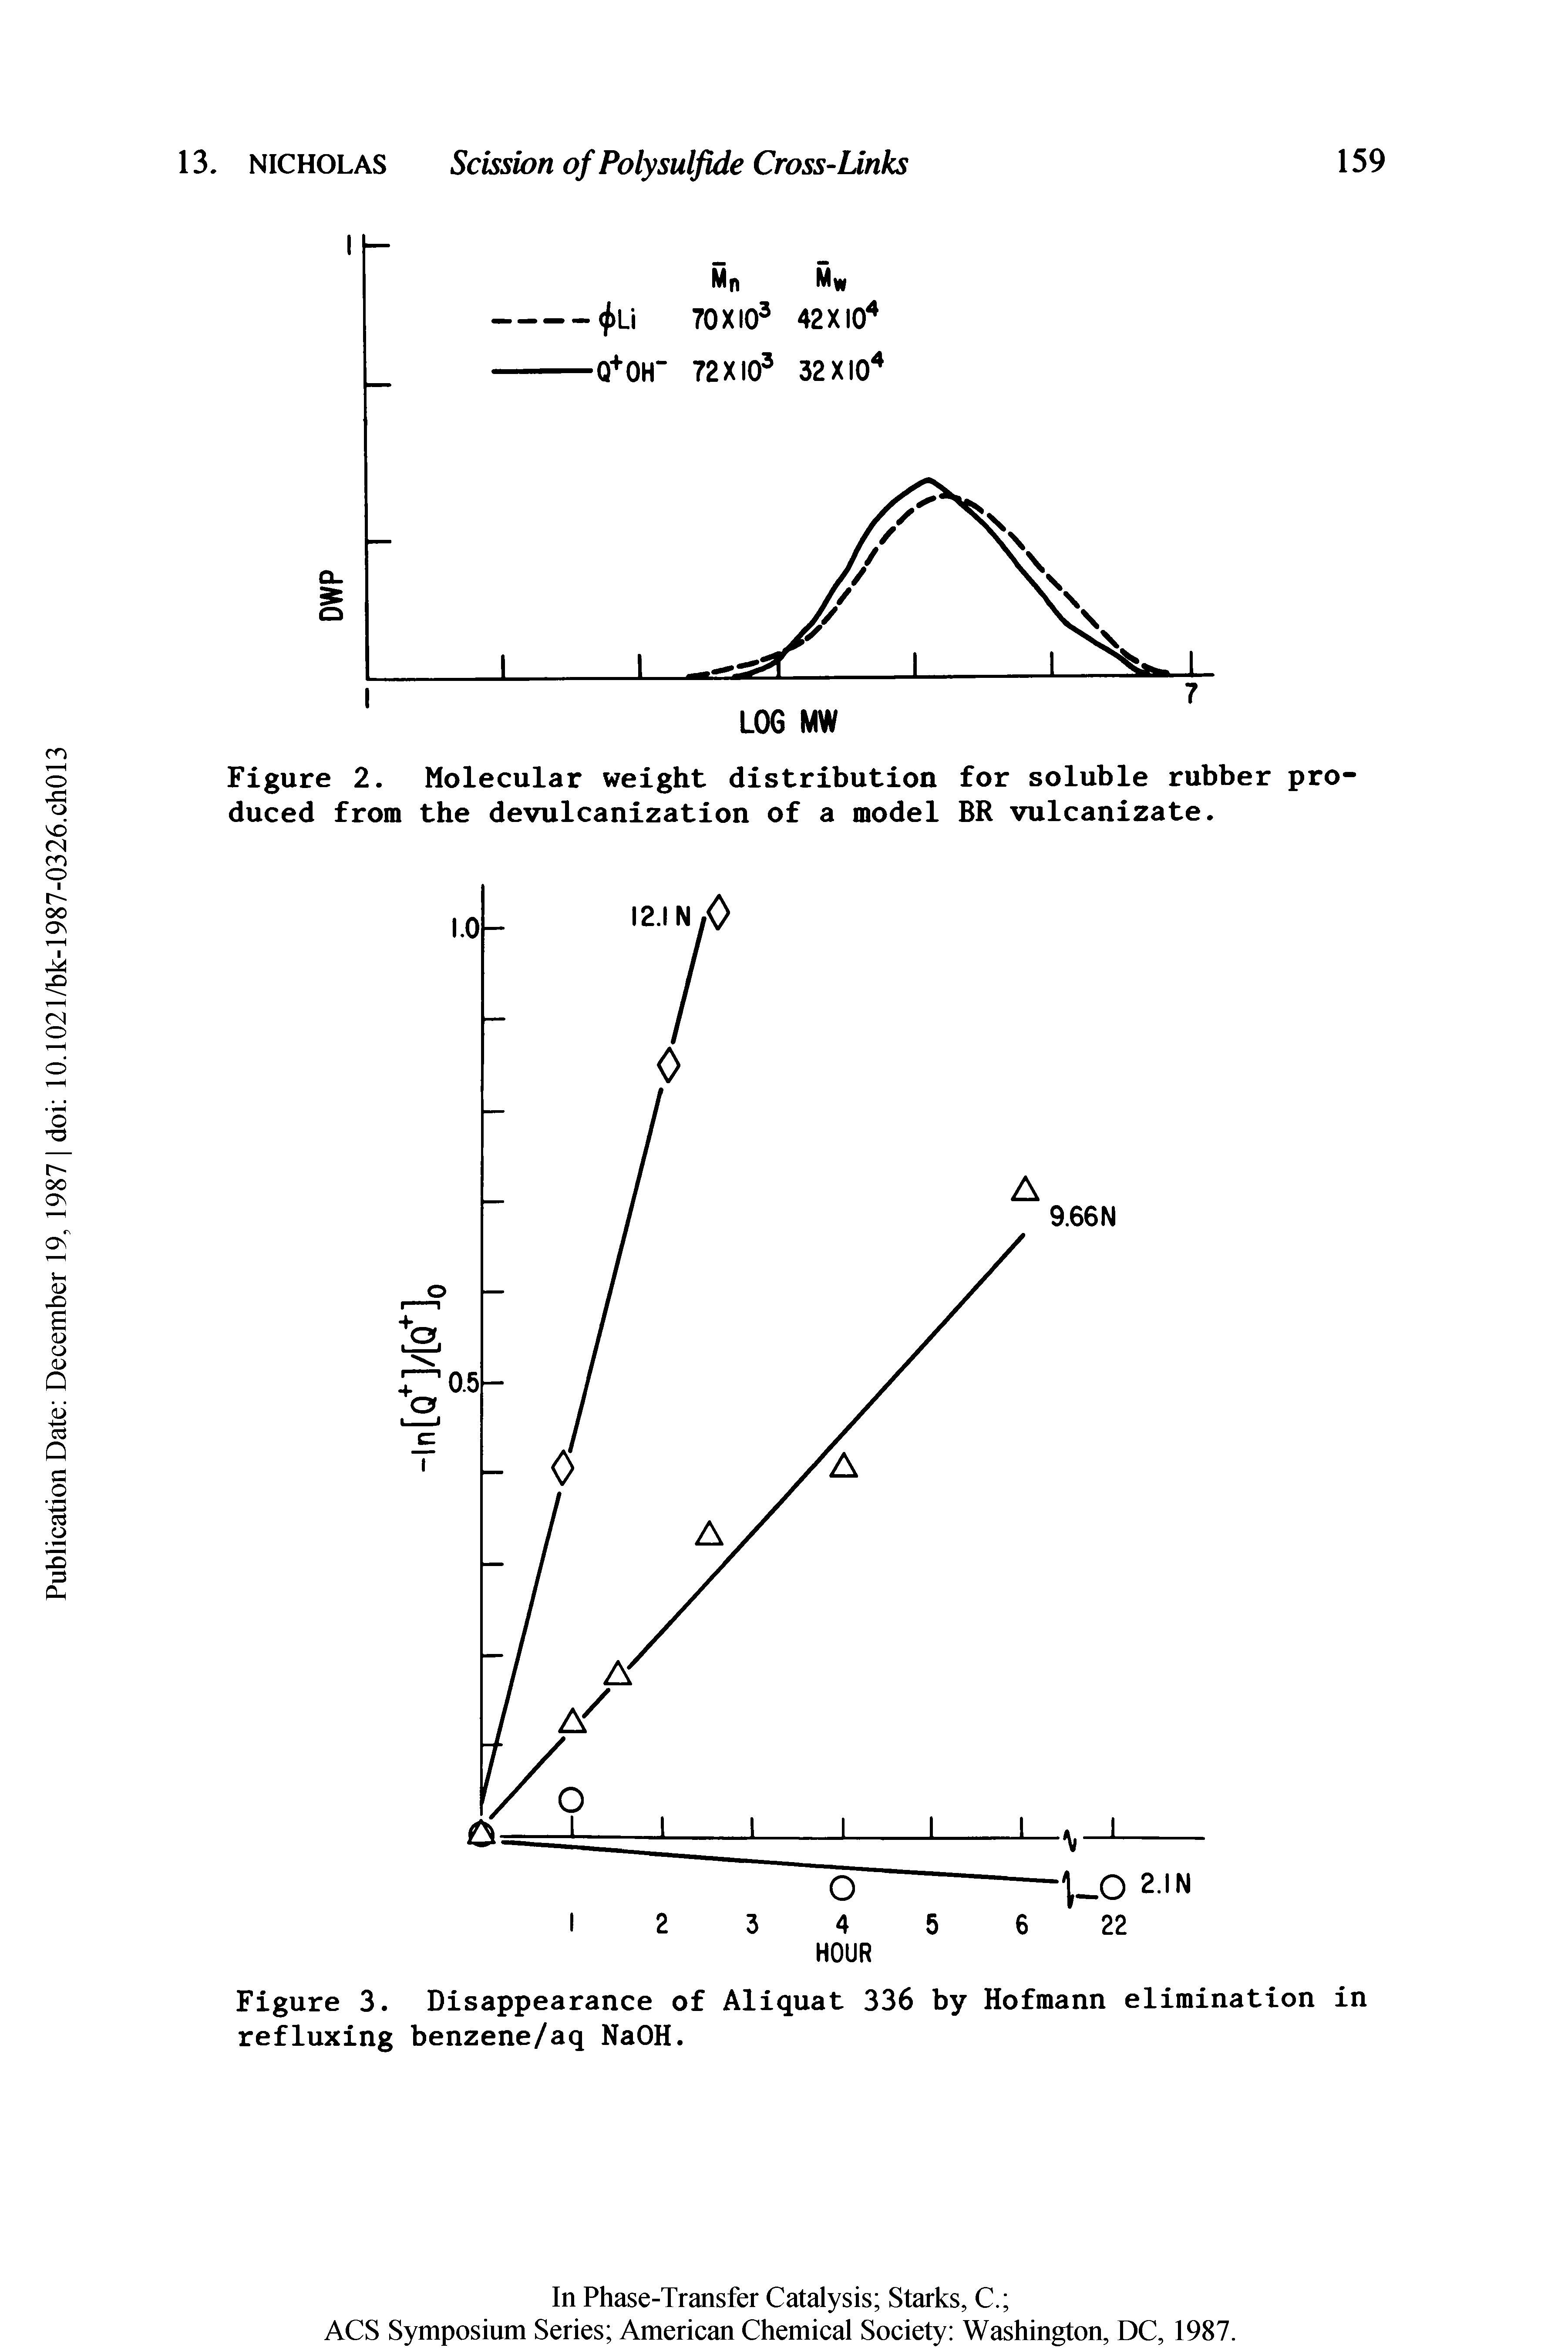 Figure 2. Molecular weight distribution for soluble rubber produced from the devulcanization of a model BR vulcanizate.